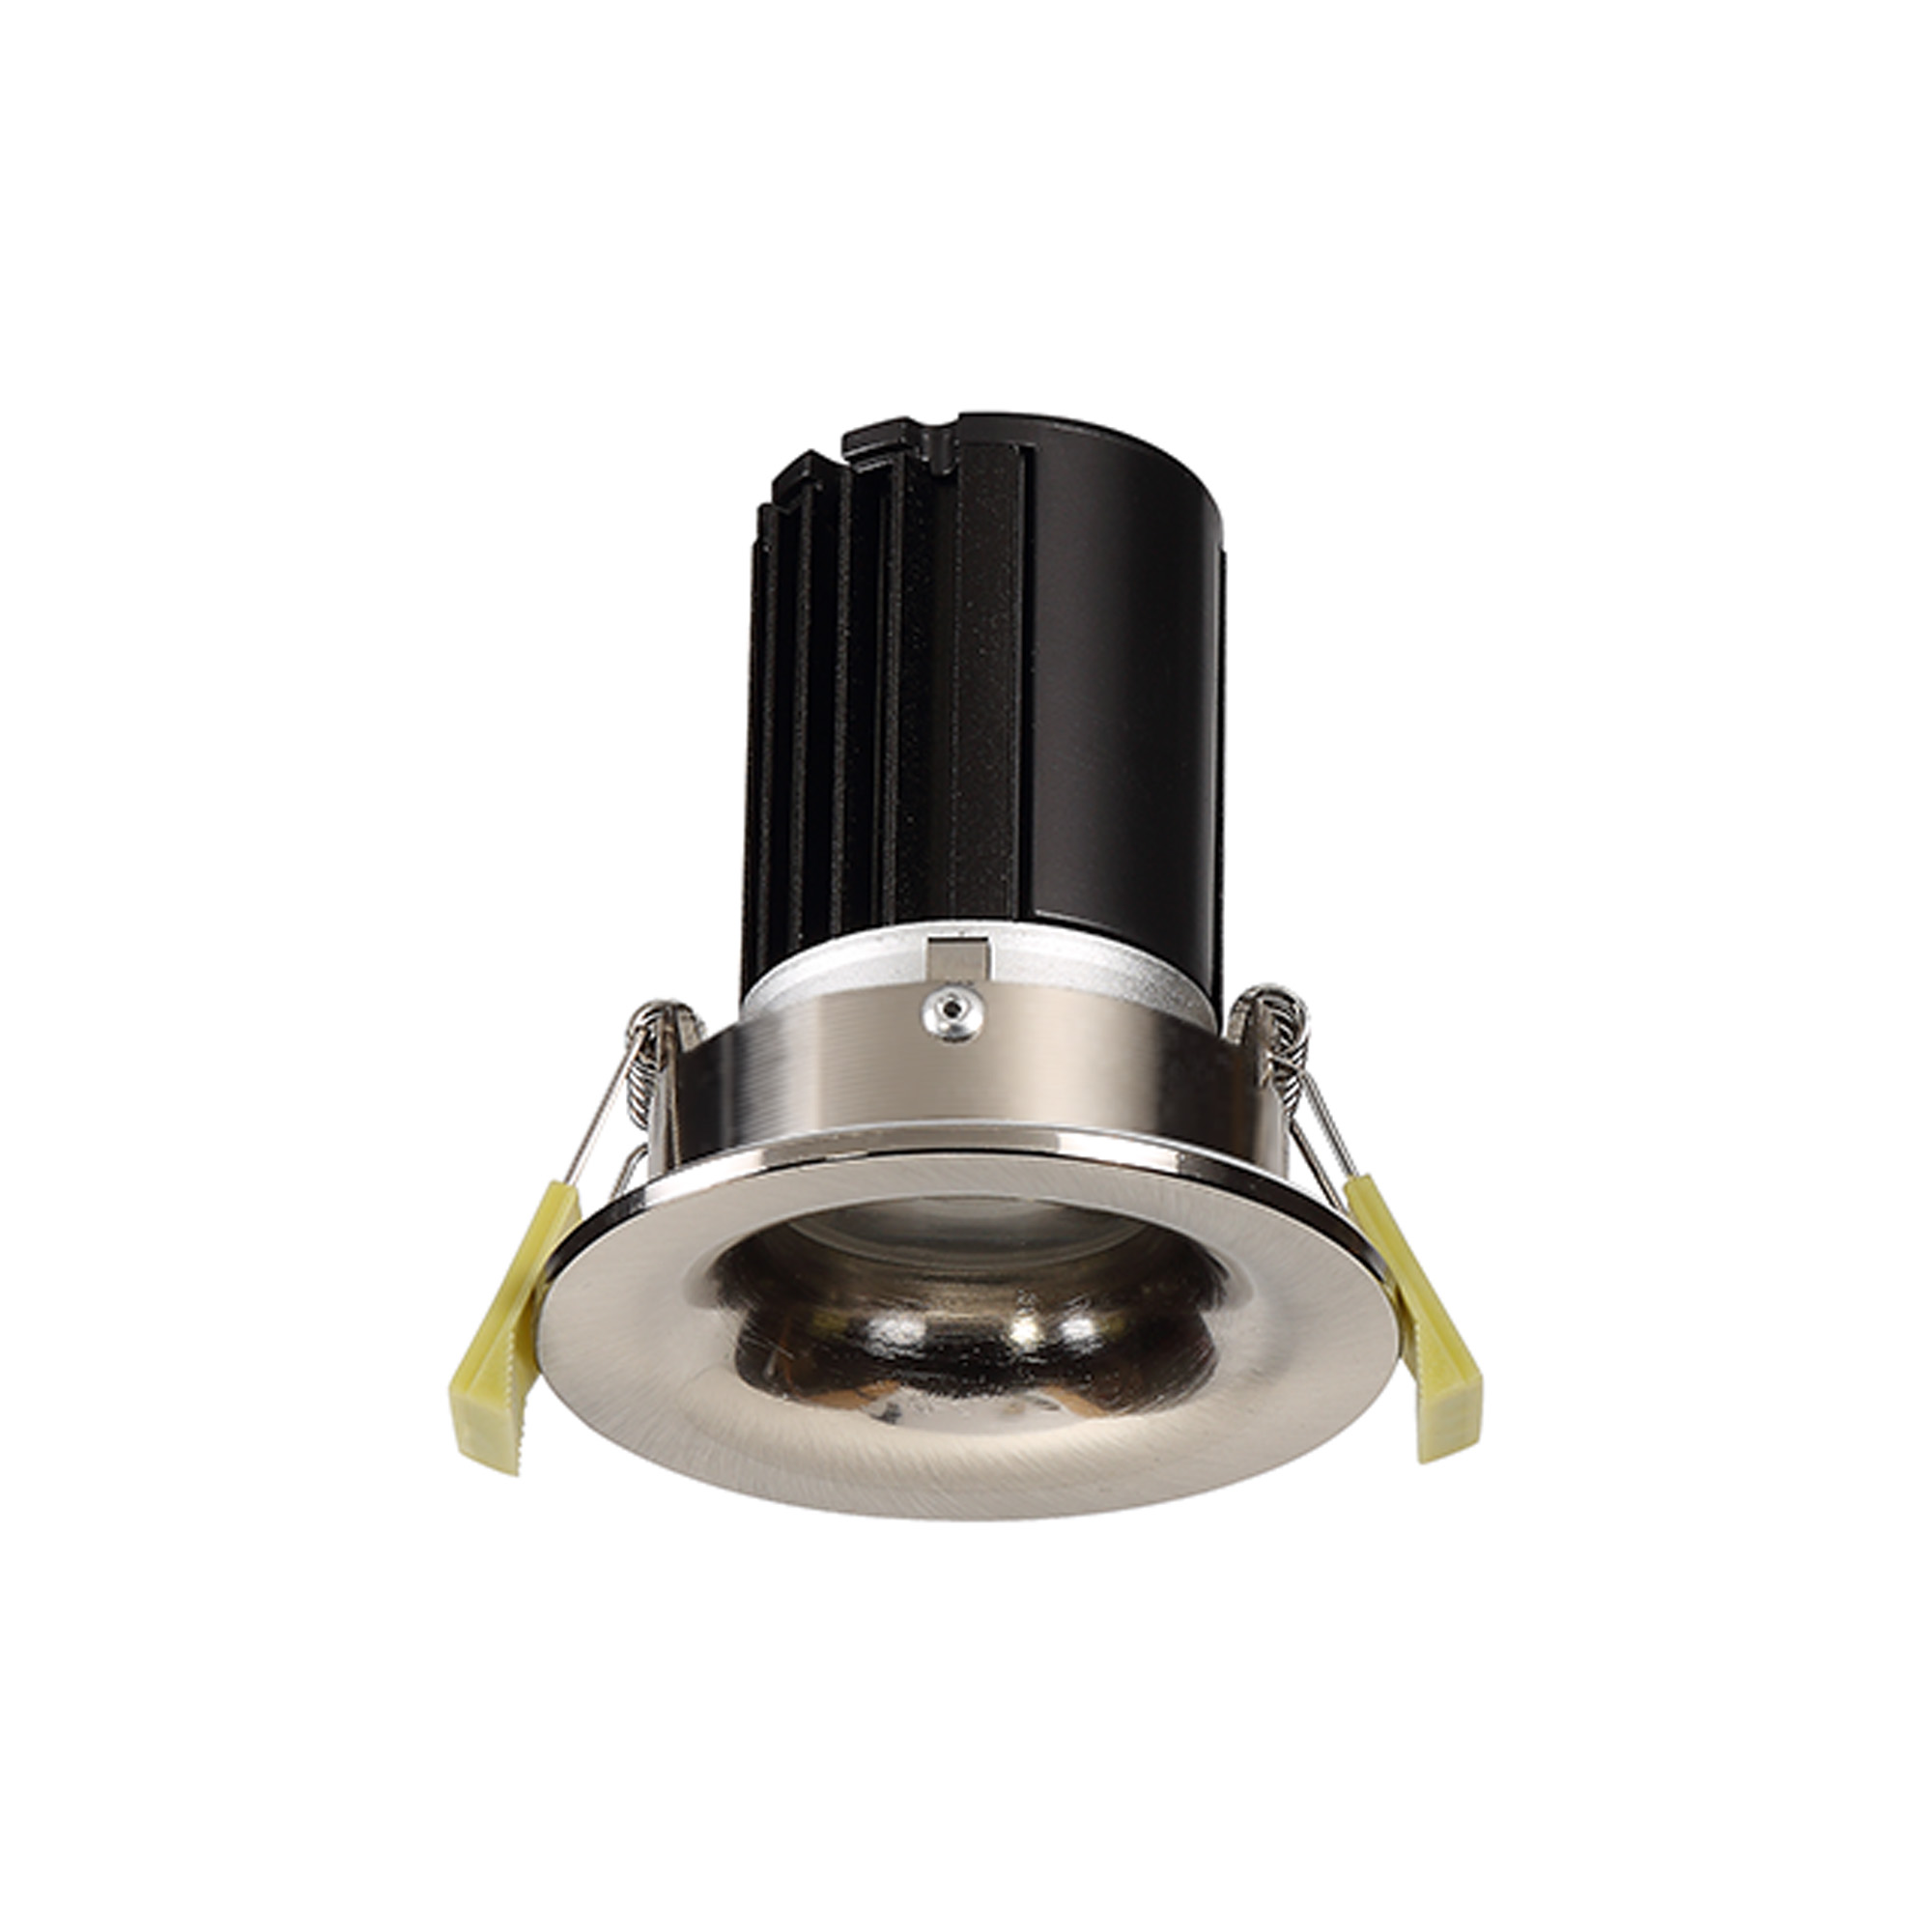 DM202495  Bruve 12 Tridonic powered 12W 3000K 1200lm 36° LED Engine;300mA ; CRI>90 LED Engine Satin Nickel Fixed Round Recessed Downlight; Inner Glass cover; IP65